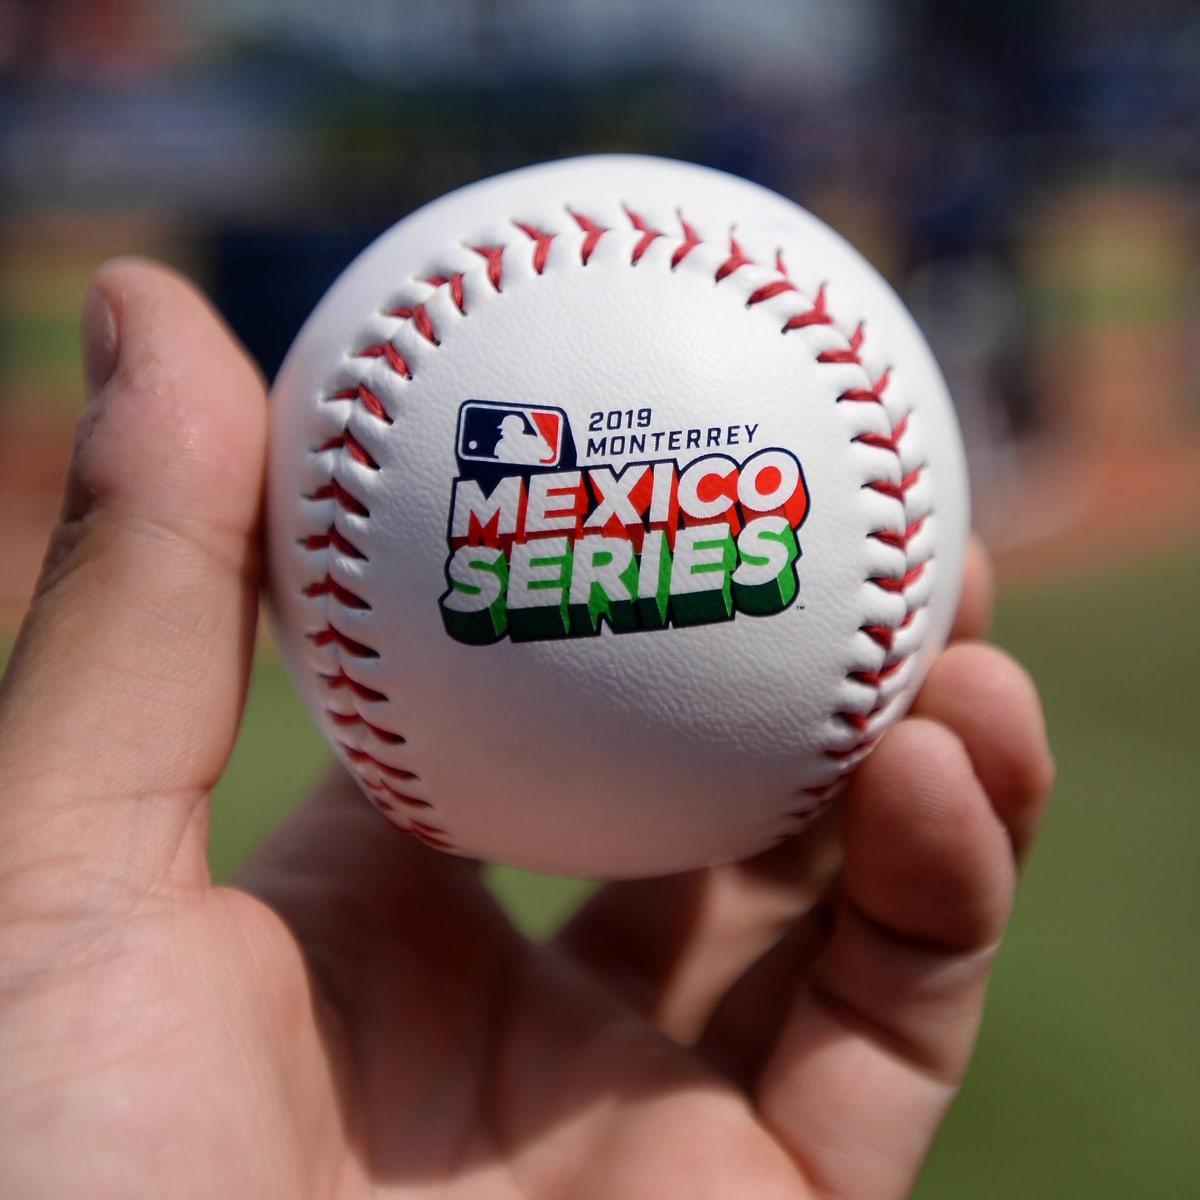 MLB to stage first ever Mexico City regular season games in 2023 - SportsPro